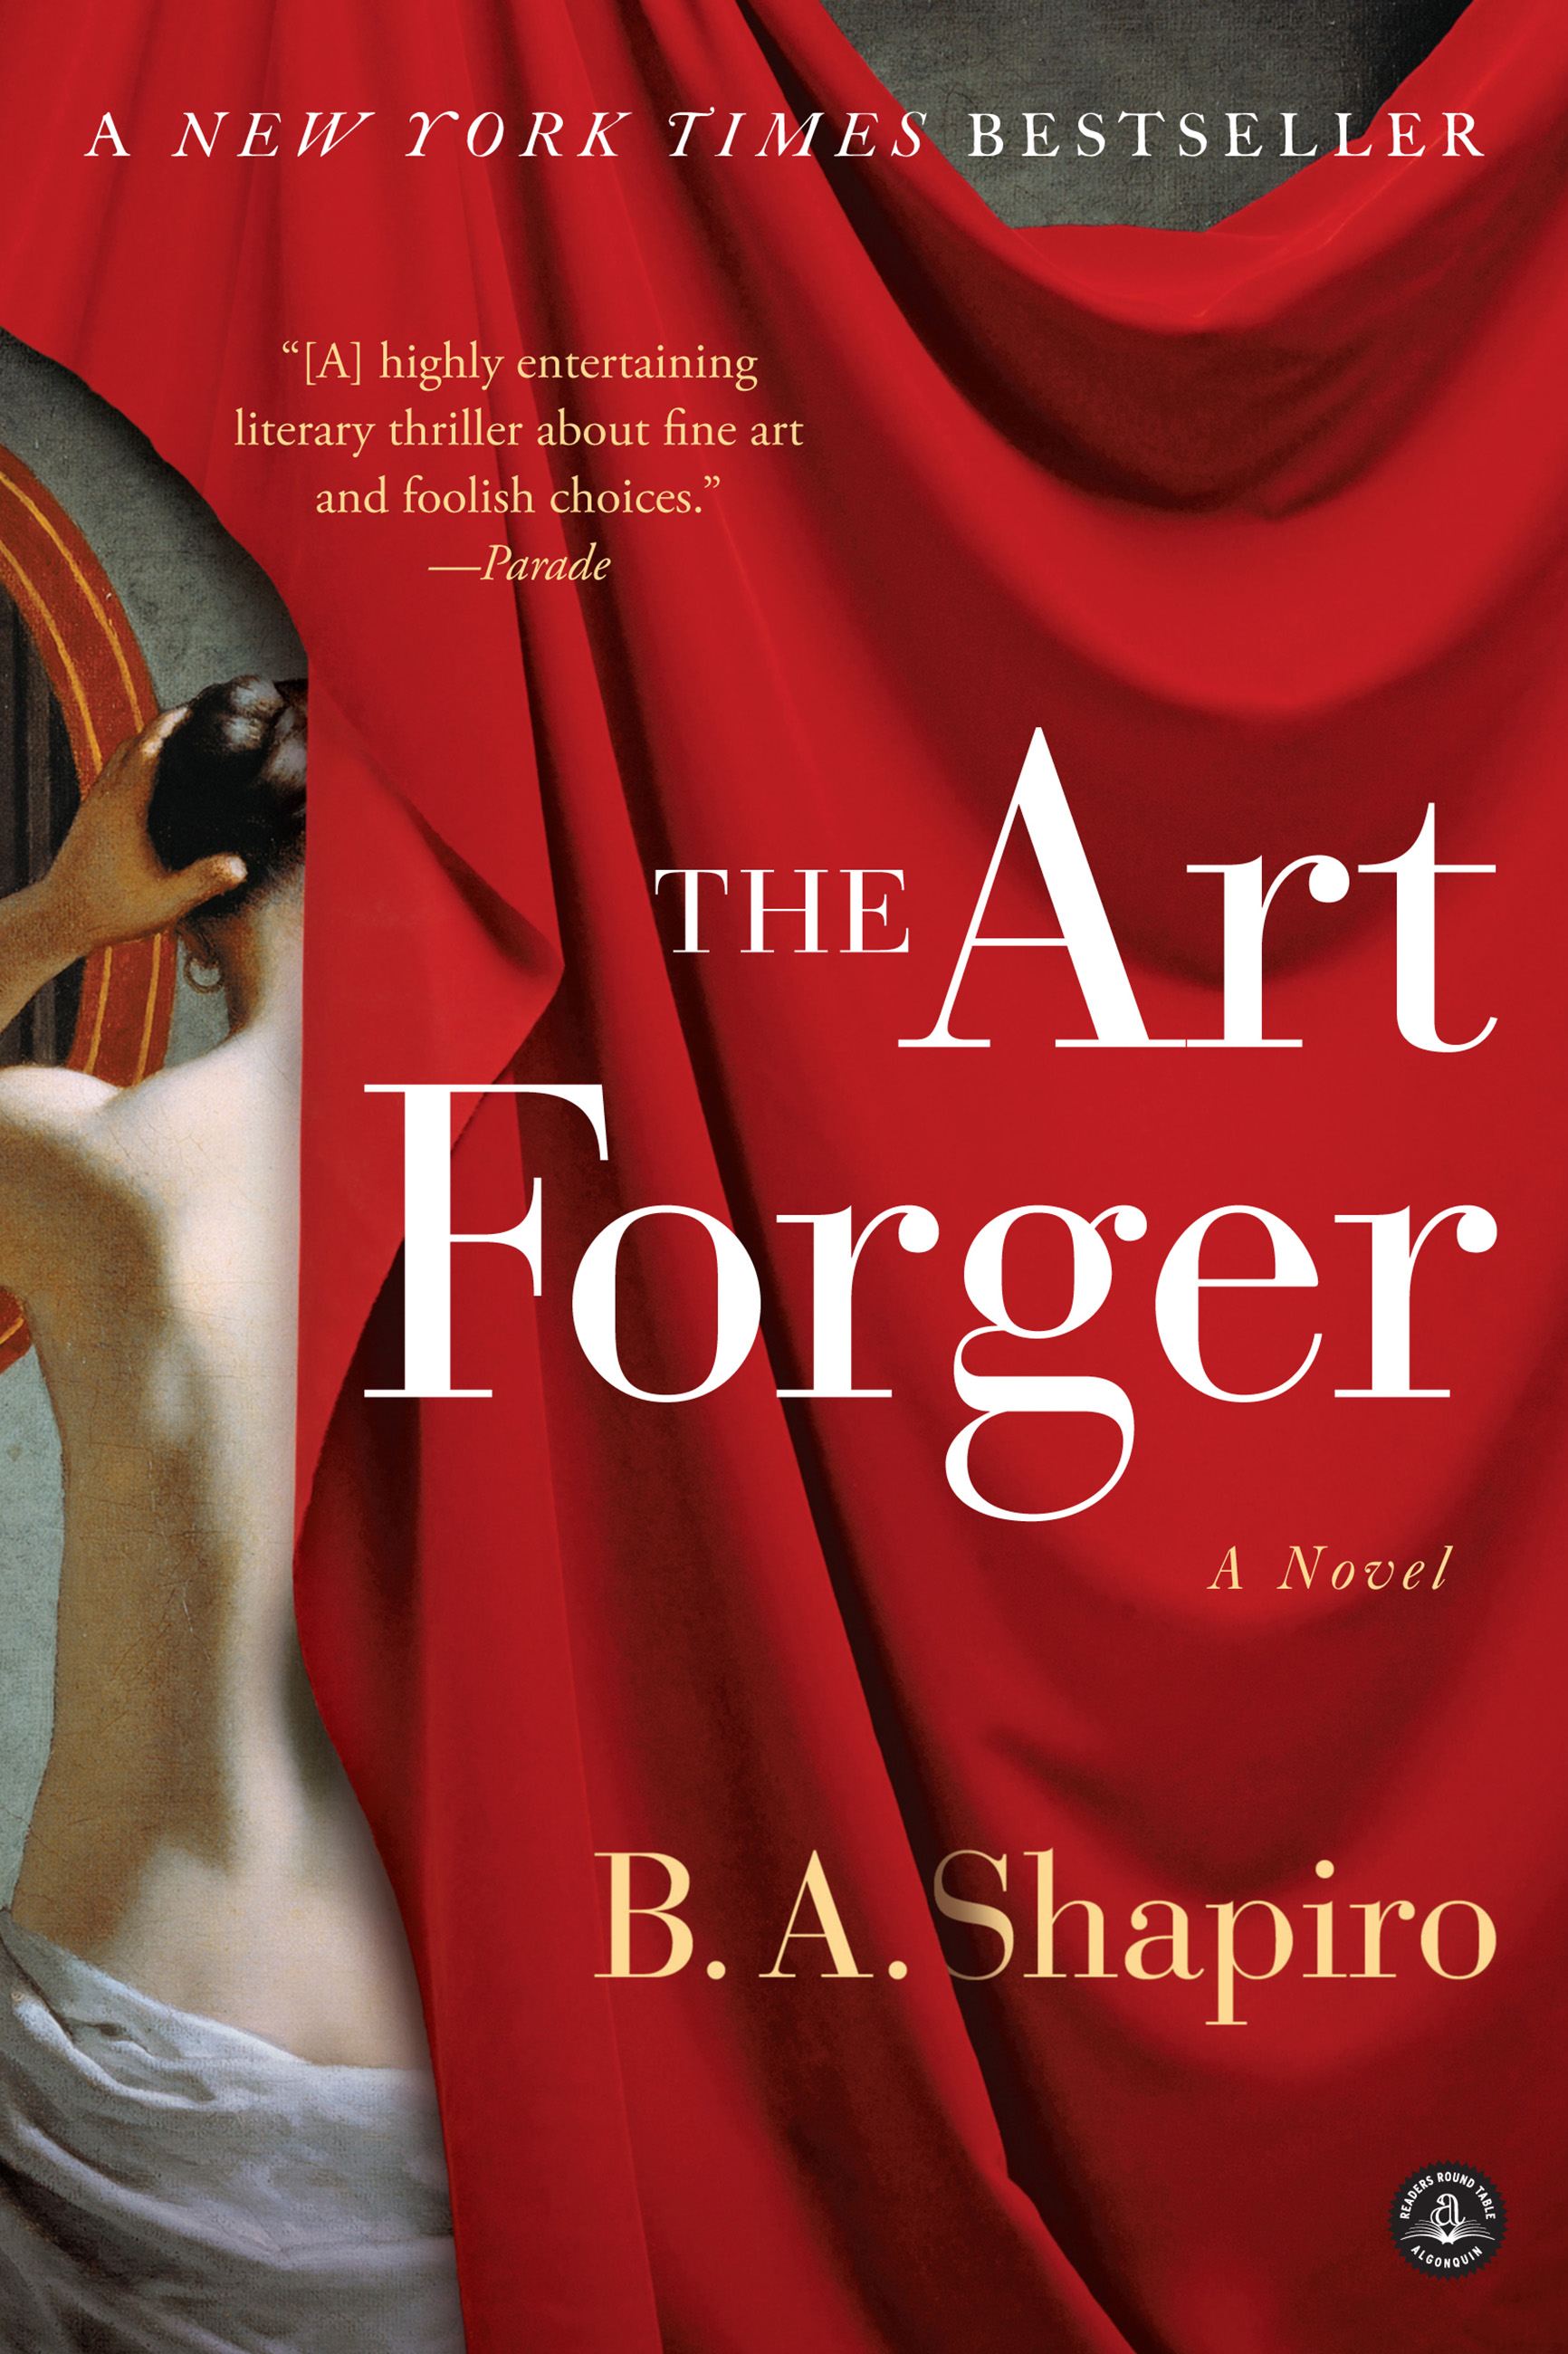 The art forger cover image